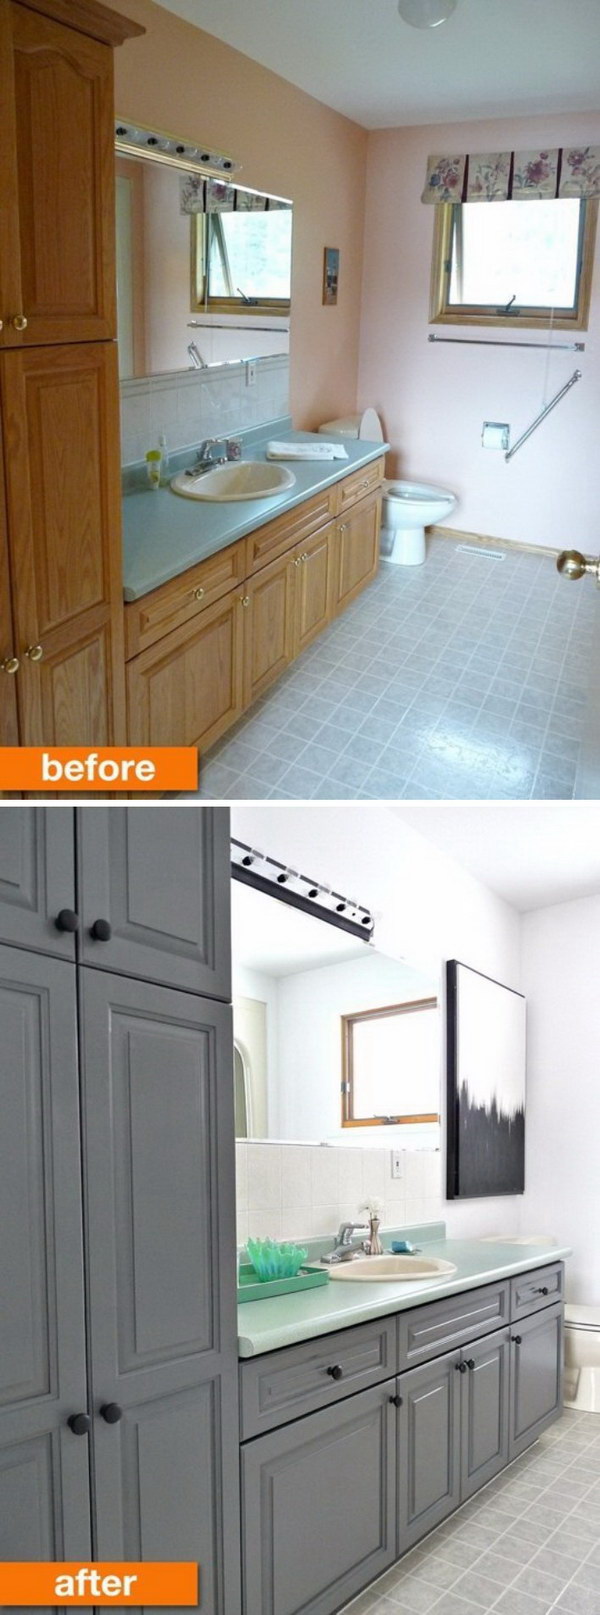 A Budget Friendly Bathroom Makeover Using Paint. 